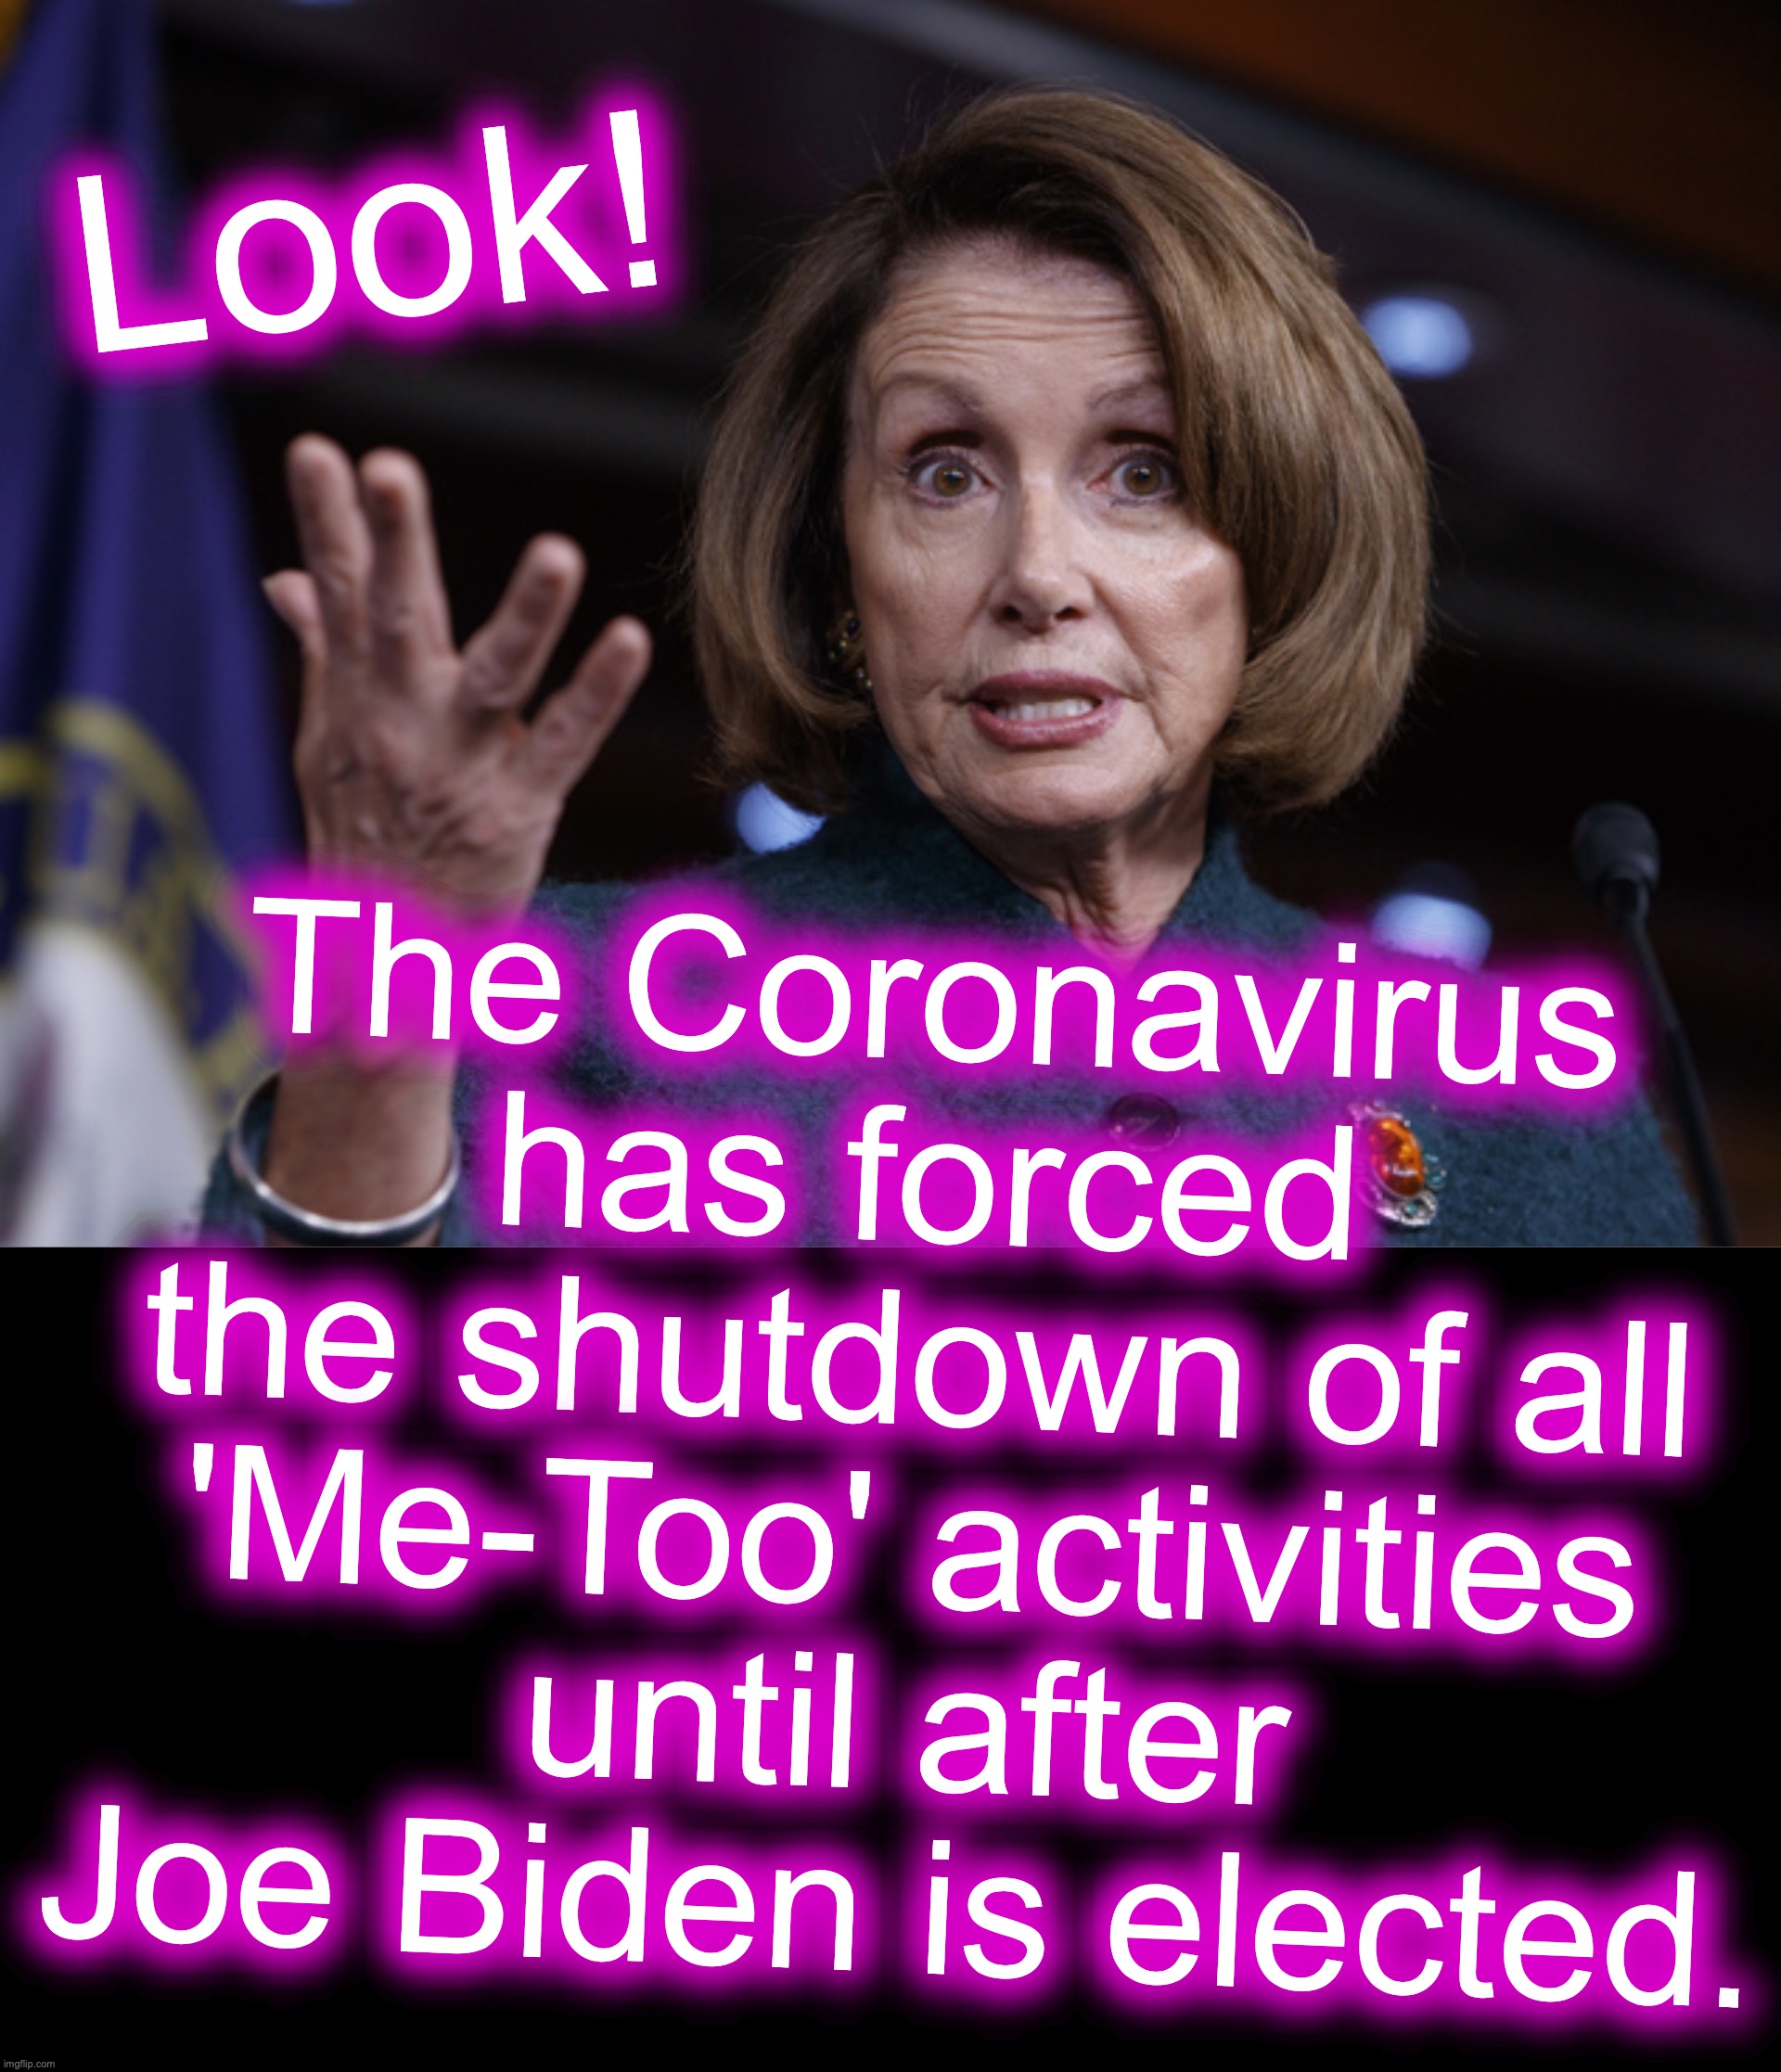 falsely rationalizing your hypocrisy | Look! The Coronavirus has forced the shutdown of all 'Me-Too' activities until after Joe Biden is elected. | image tagged in good old nancy pelosi,metoo,me too,hypocrisy | made w/ Imgflip meme maker